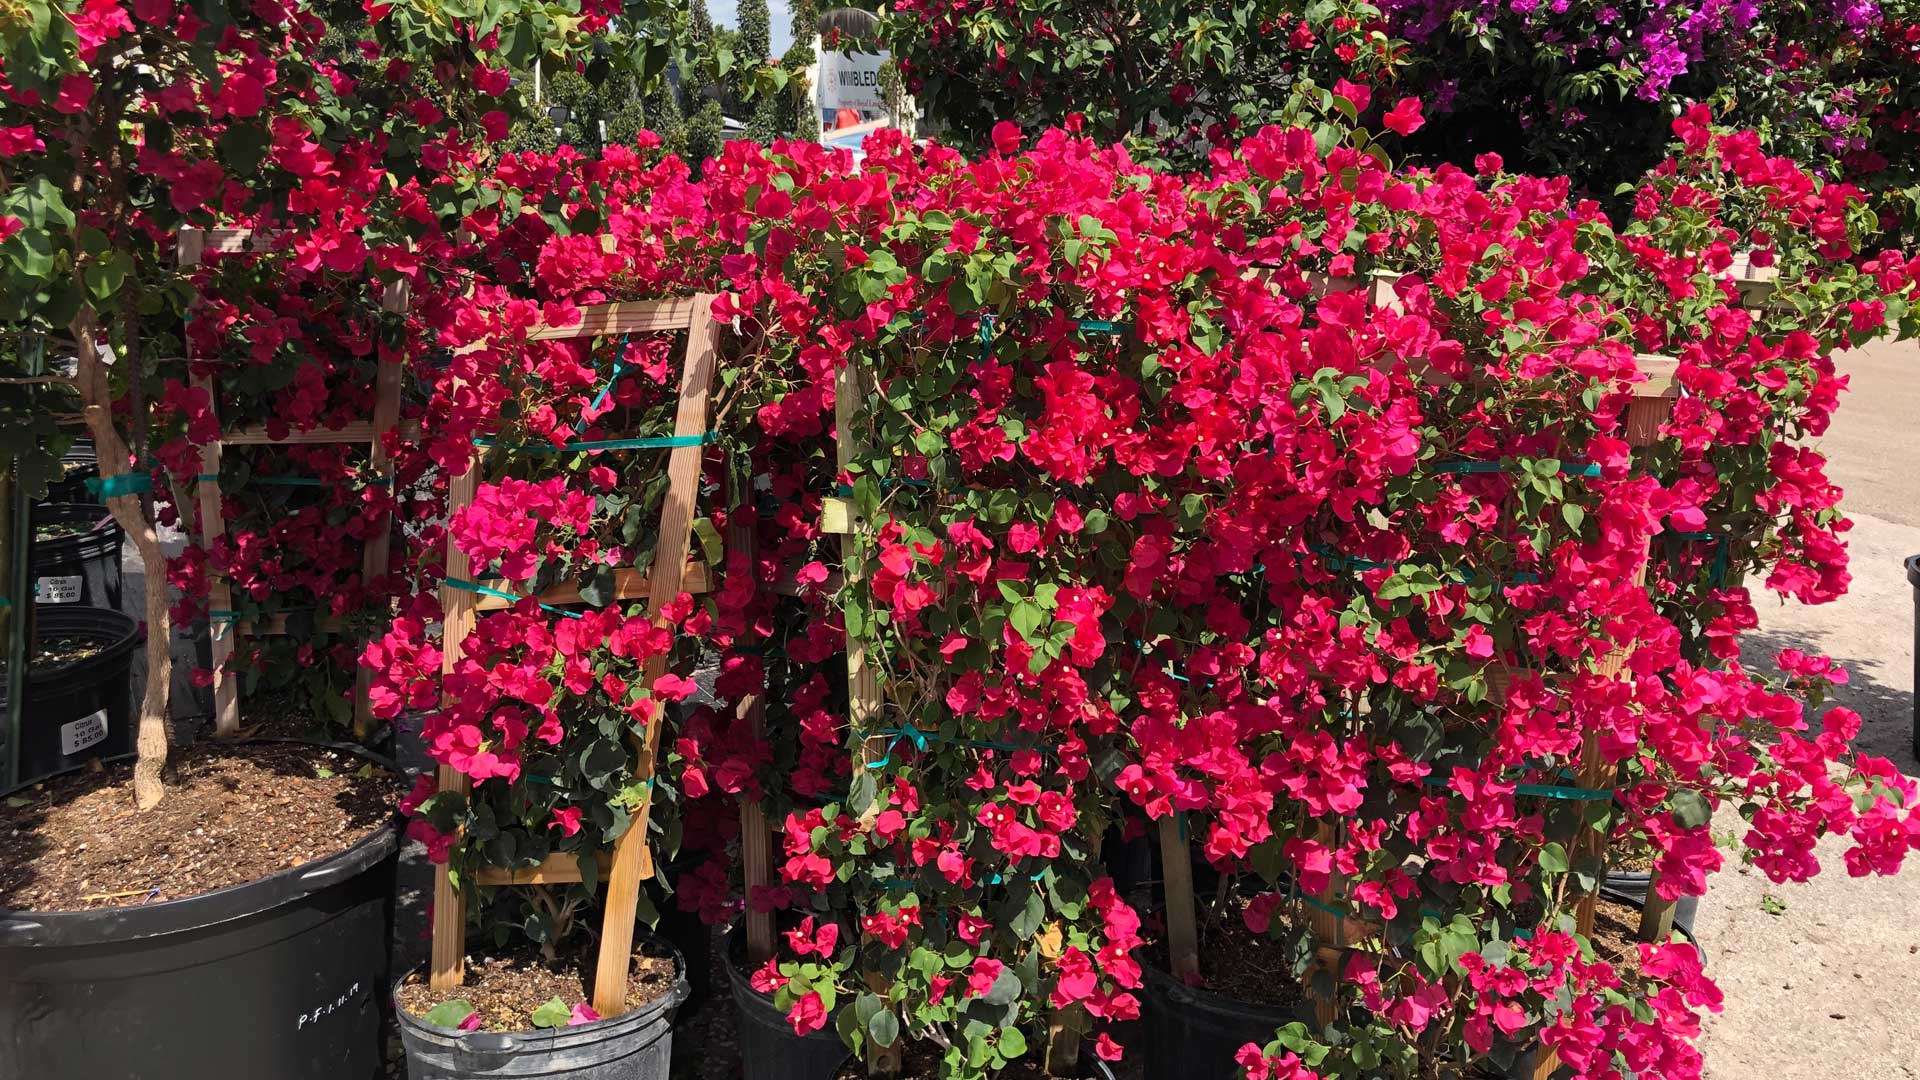 Bougainvillea growing at a property in Windermere, FL.